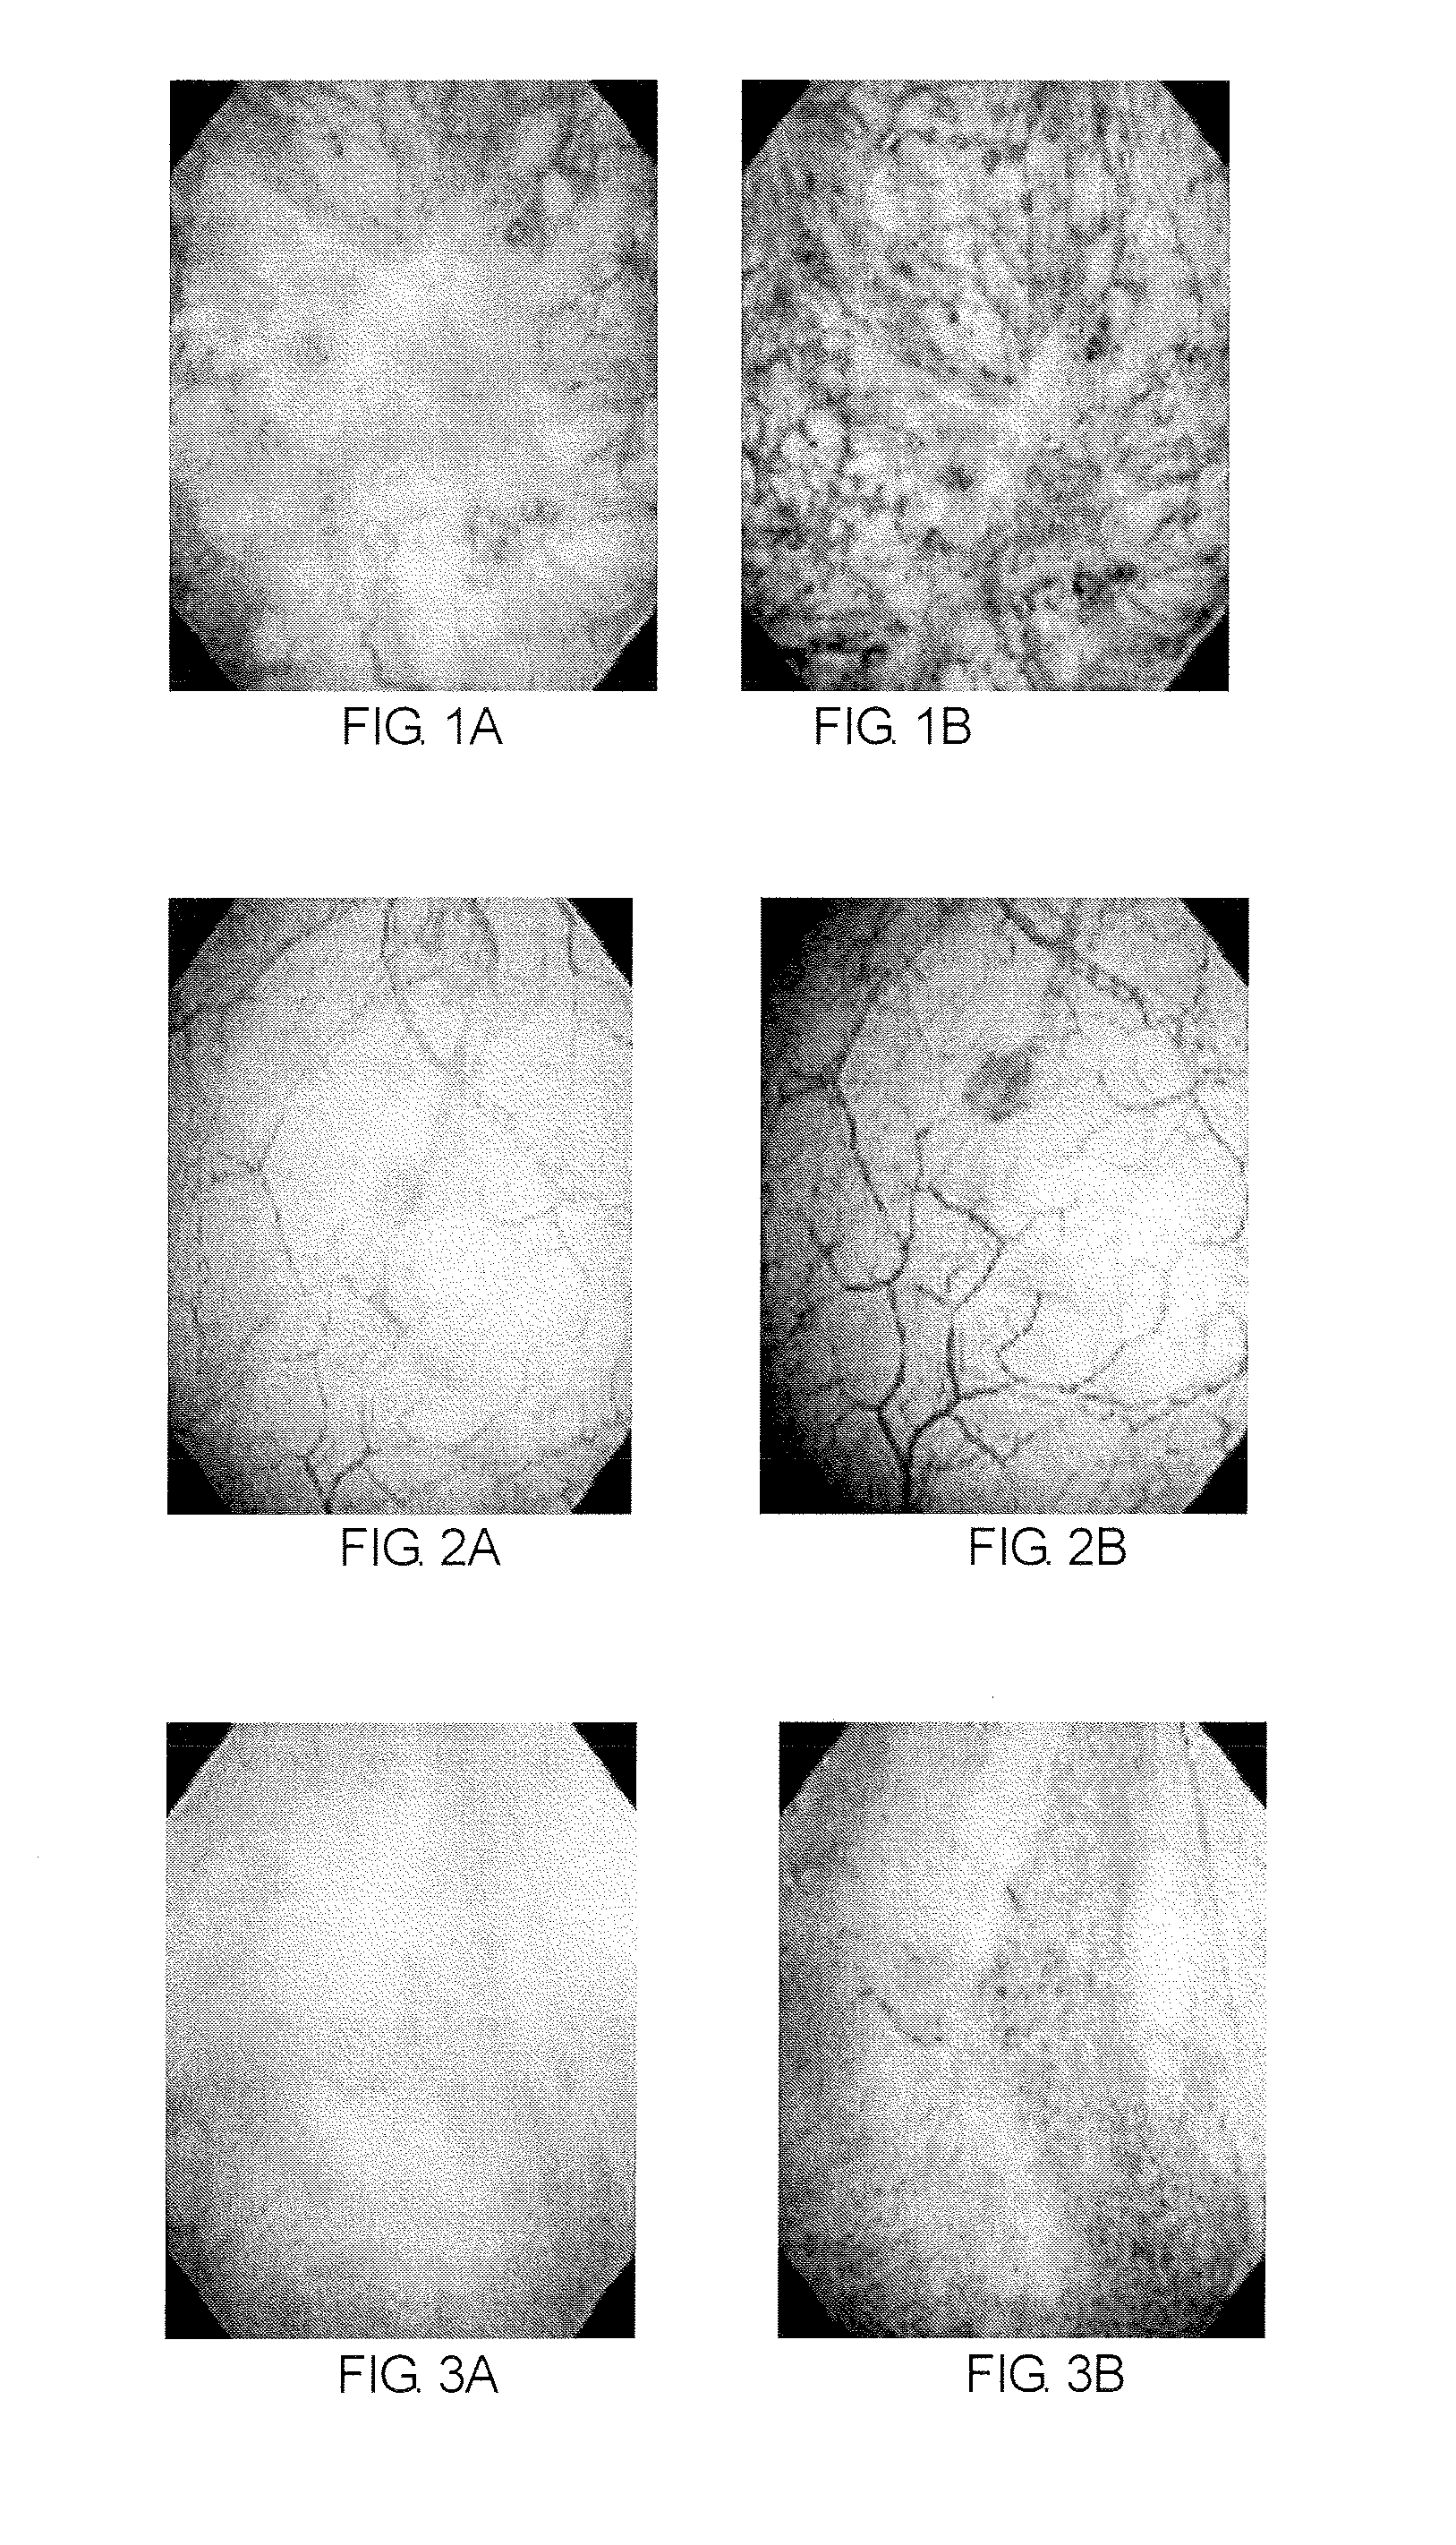 Method of diagnosing a lower urinary tract disorder